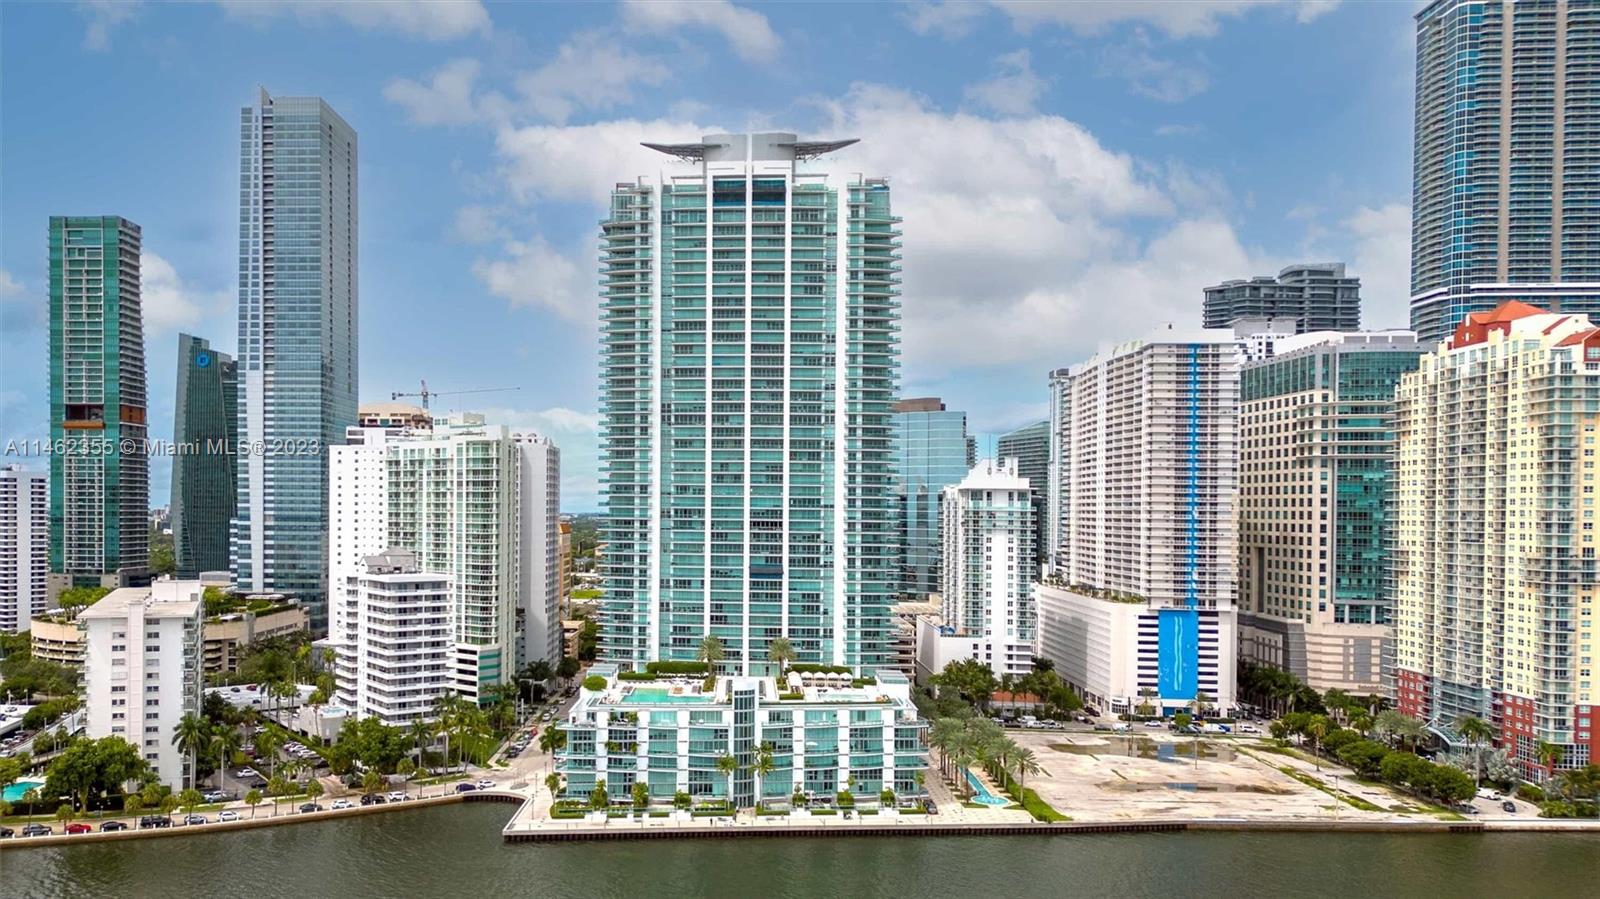 Prime location amid local conveniences, Biscayne bay views! This lovely 2-bedroom, 3-full bathroom plus den unit, is found at Jade Condominium. The luxury complex is an easy pedestrian distance to Biscayne Bay, and just a short drive to Brickell City Centre. Enjoy amazing views of Biscayne Bay. The feature-rich on-site amenities package includes a pool, fitness center, and rooftop access. Across the threshold, nice touches include an open floor plan and stylish lighting. The kitchen promises many-a-great meal, with natural light, premium Miele appliances, and an attractive L-shaped layout.